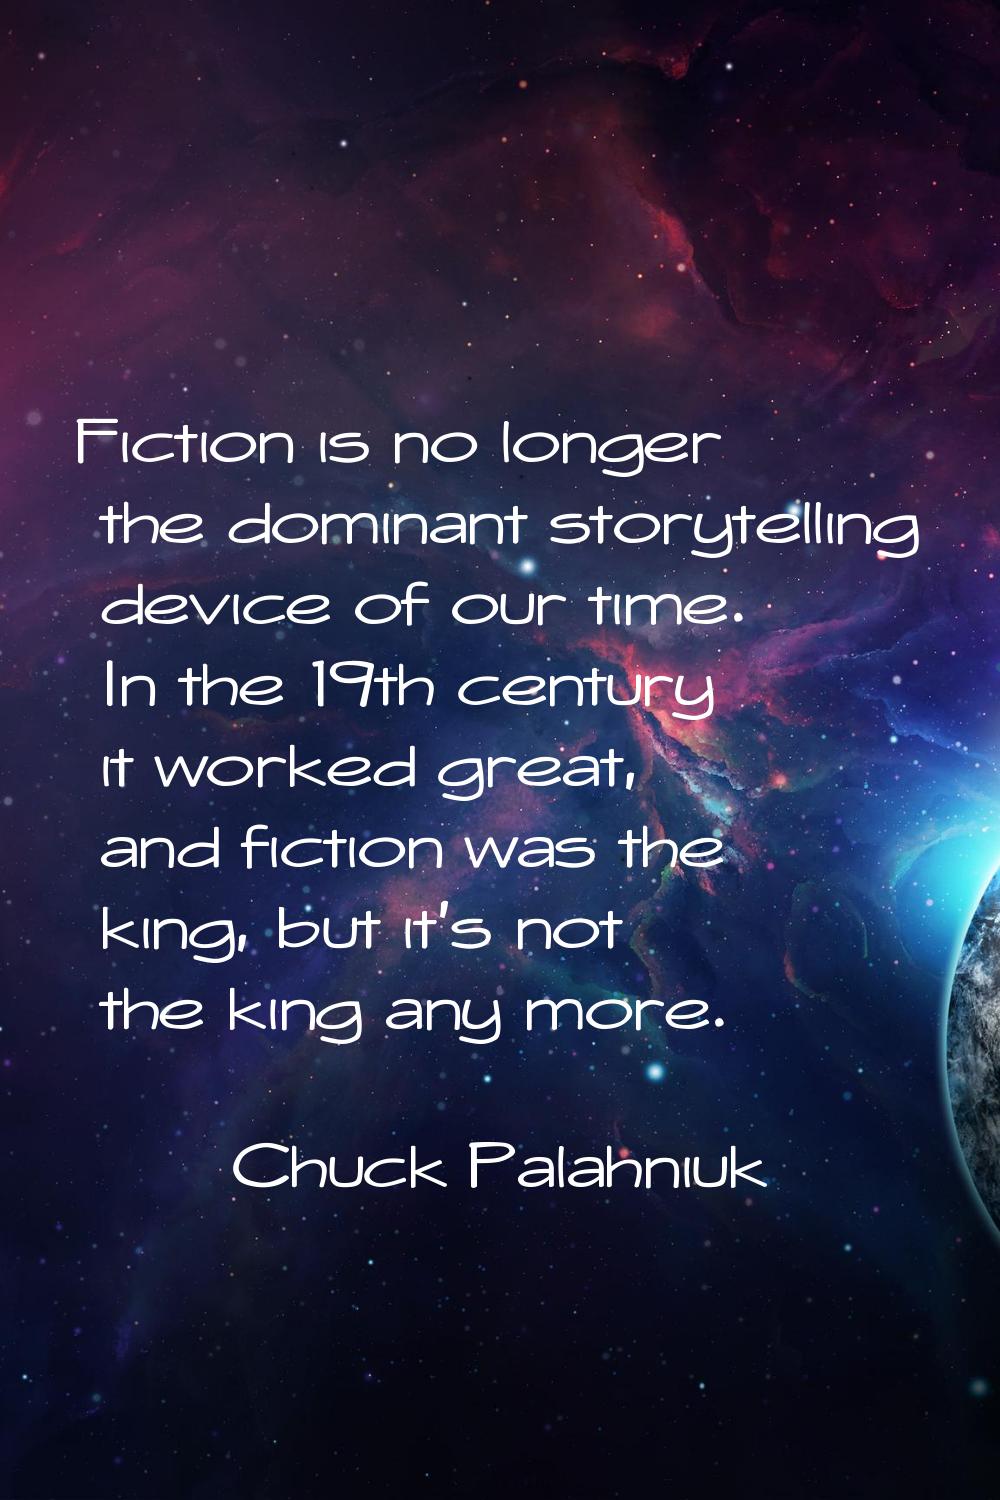 Fiction is no longer the dominant storytelling device of our time. In the 19th century it worked gr